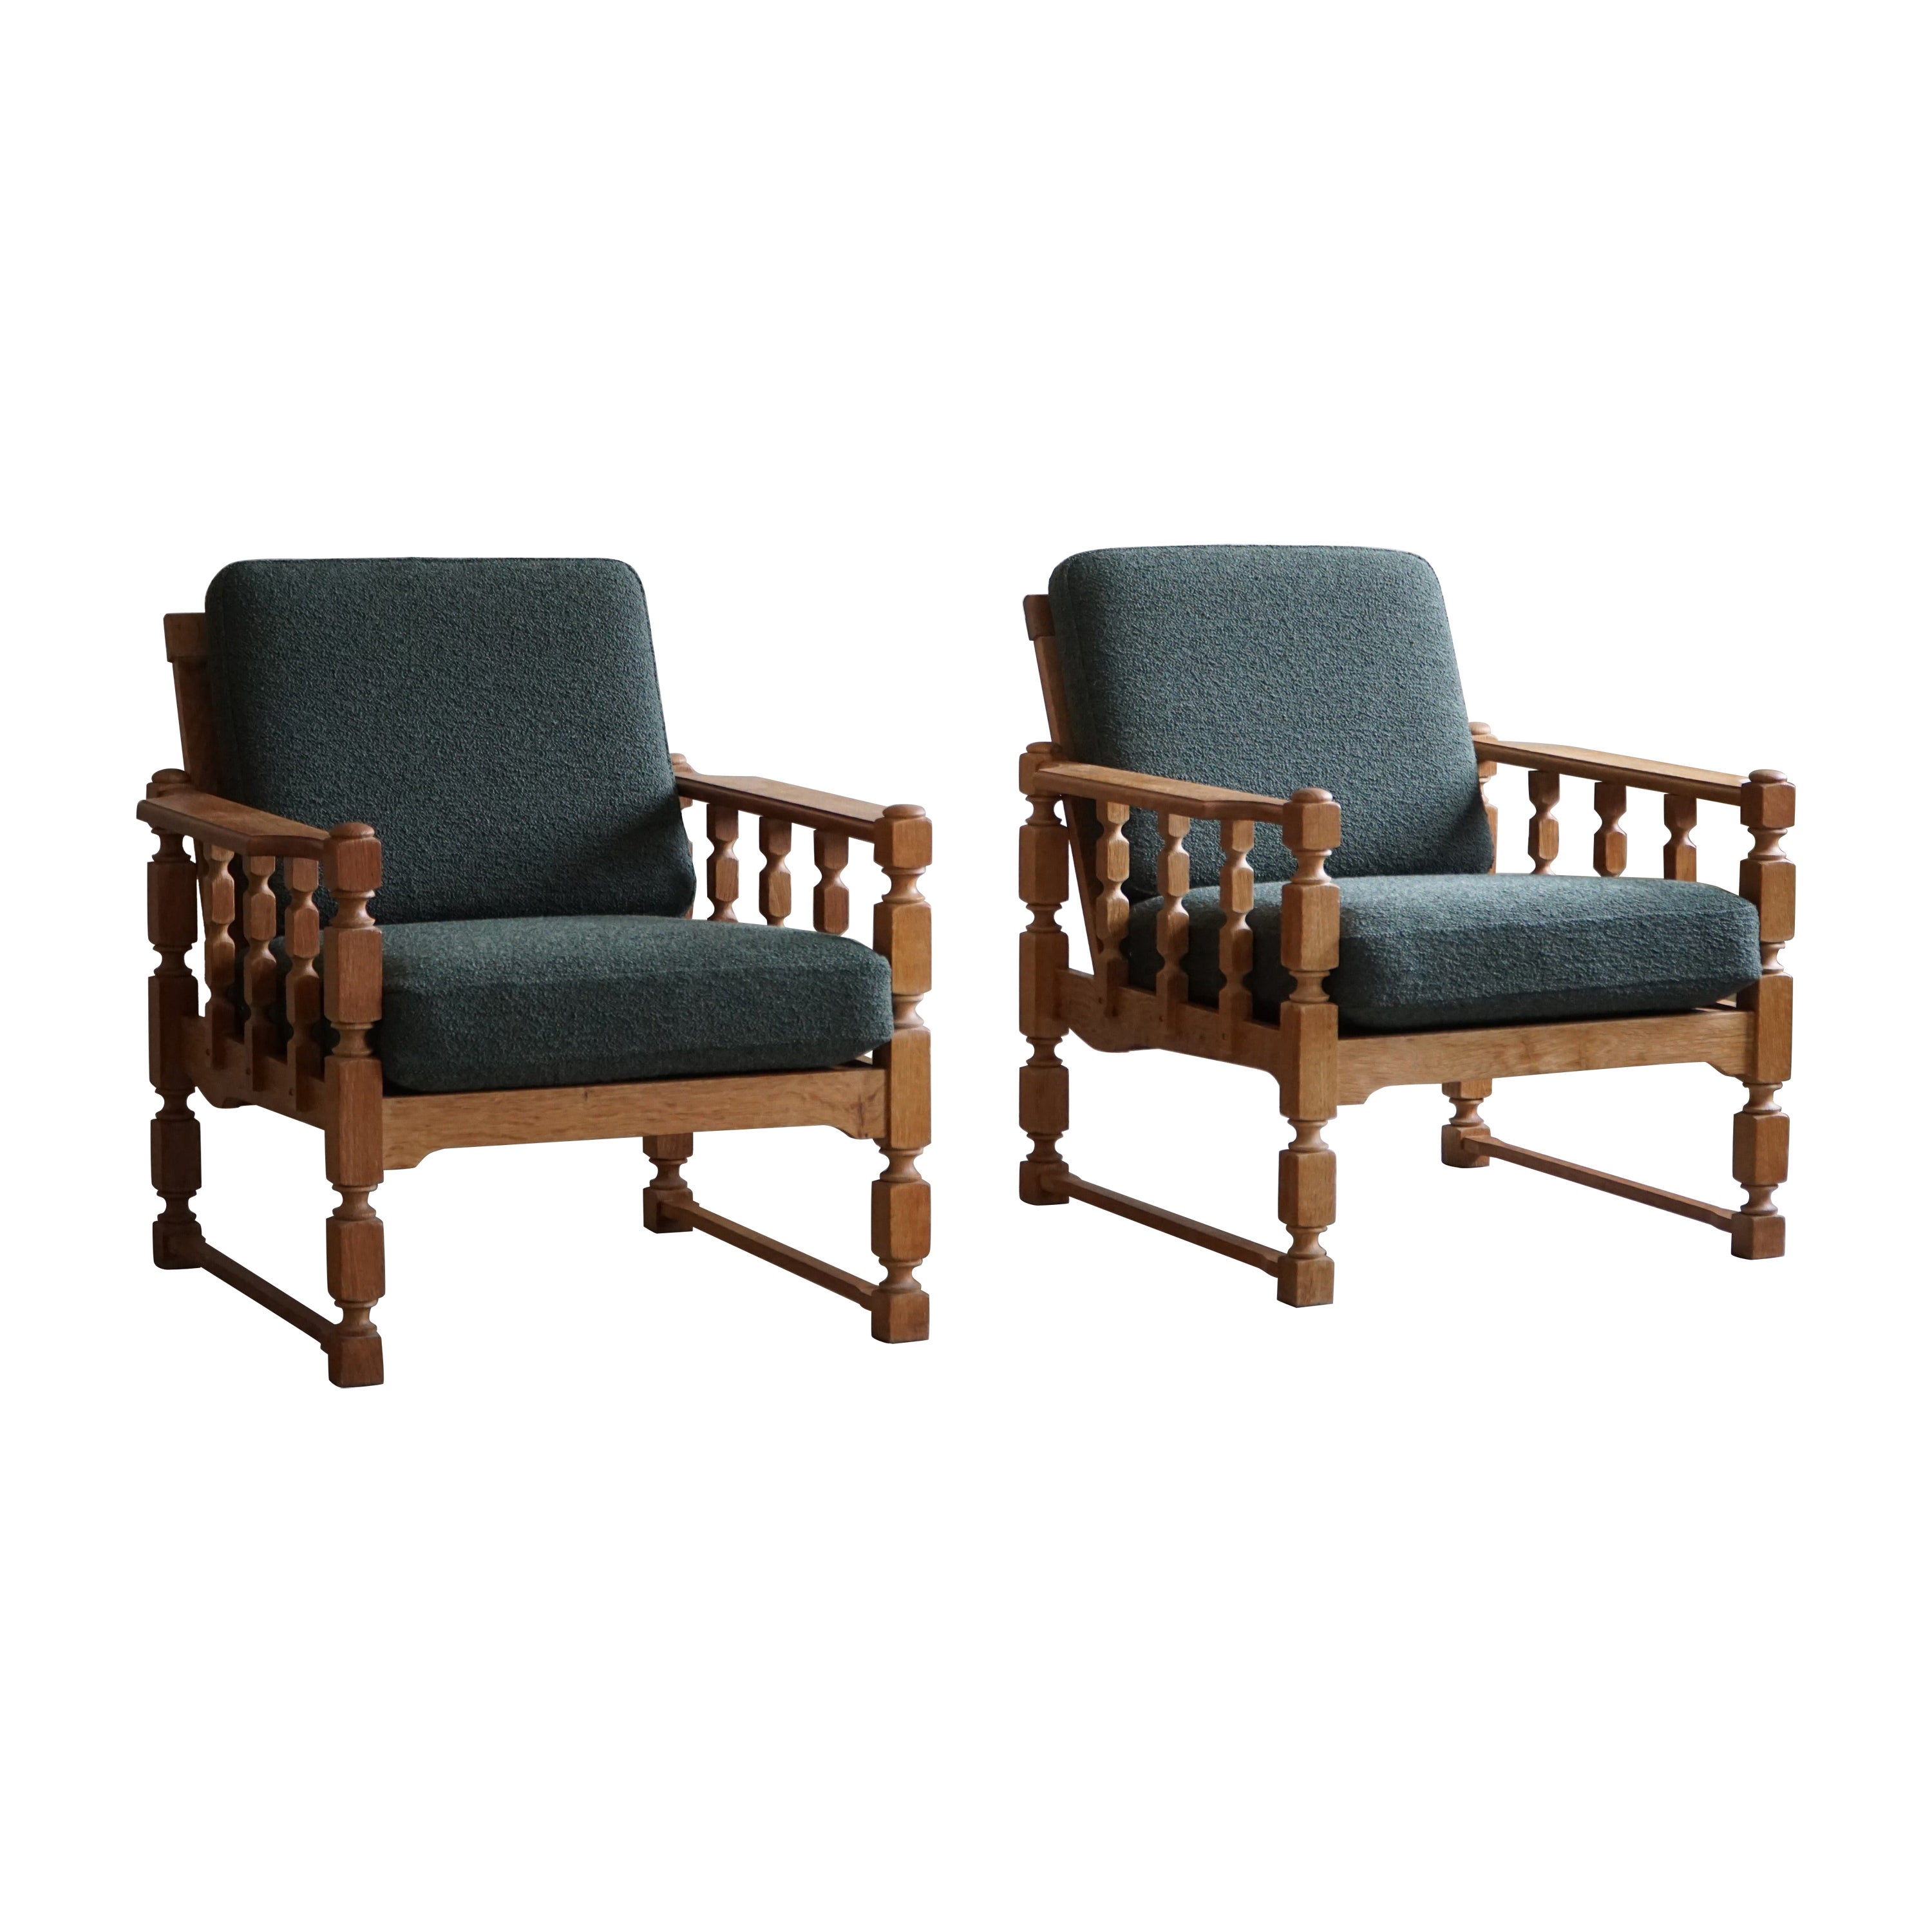 Pair of Lounge Chairs in Oak & Green Bouclé, Henning Kjærnulf style, 1960s For Sale